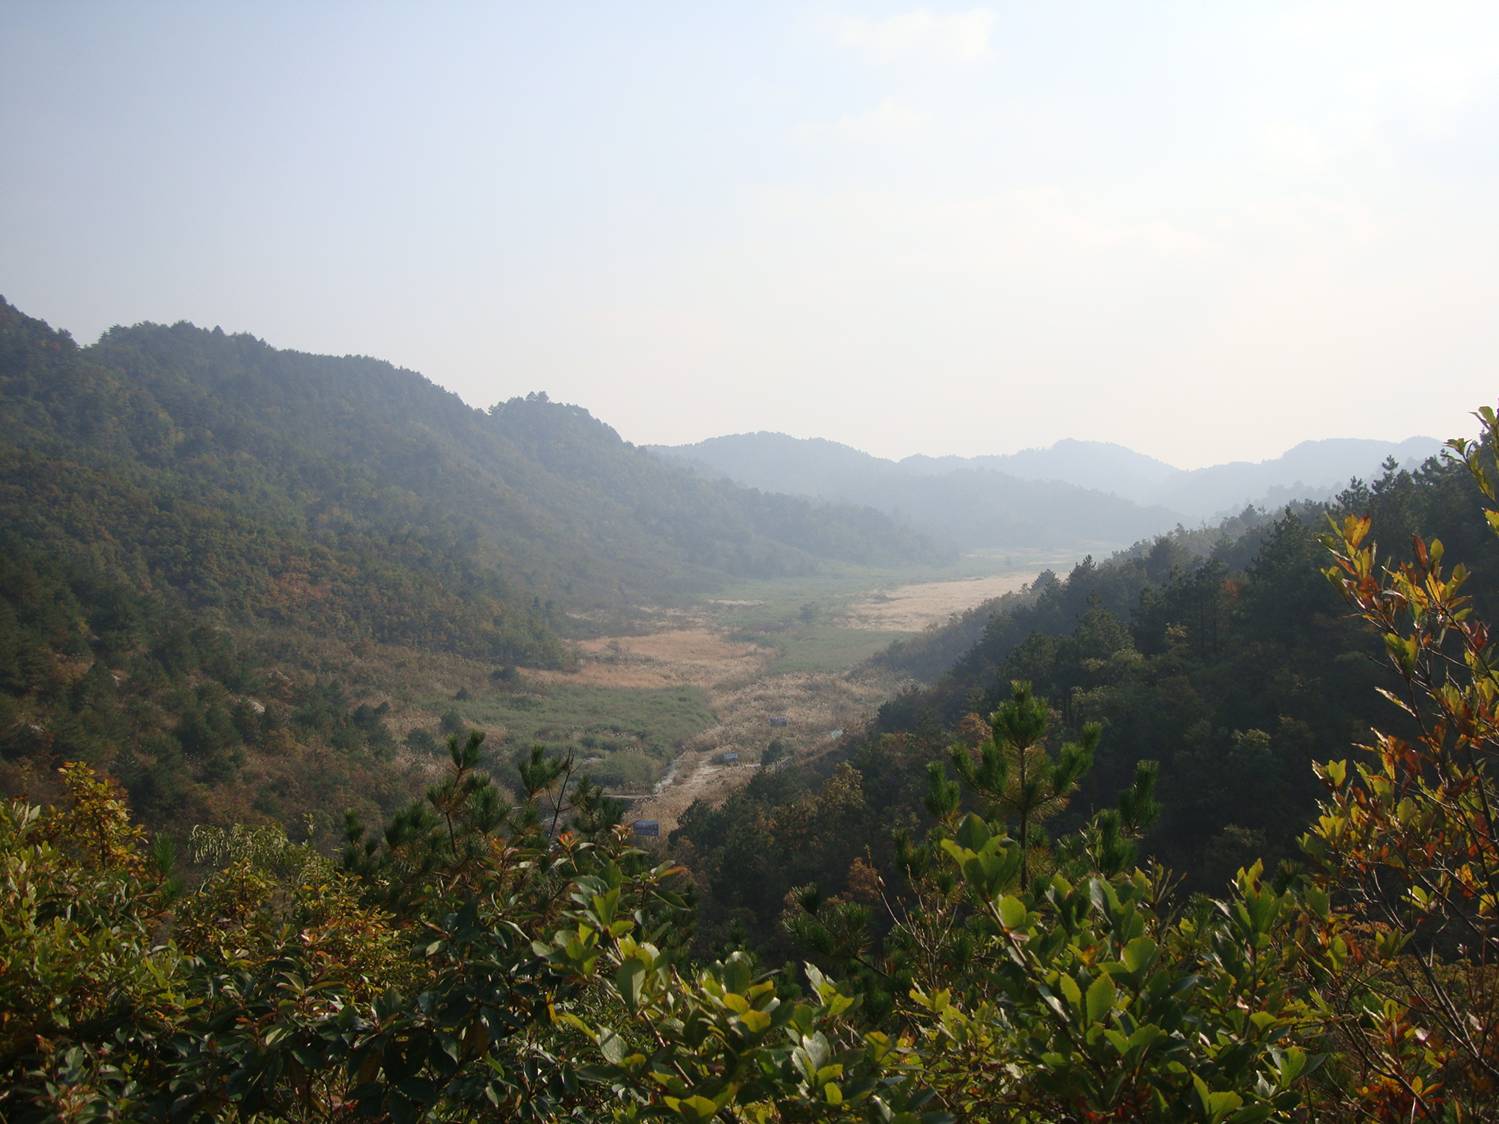 Picture: A view of the valley from Daming Shan (Big Clear Mountain), Zhejiang, China